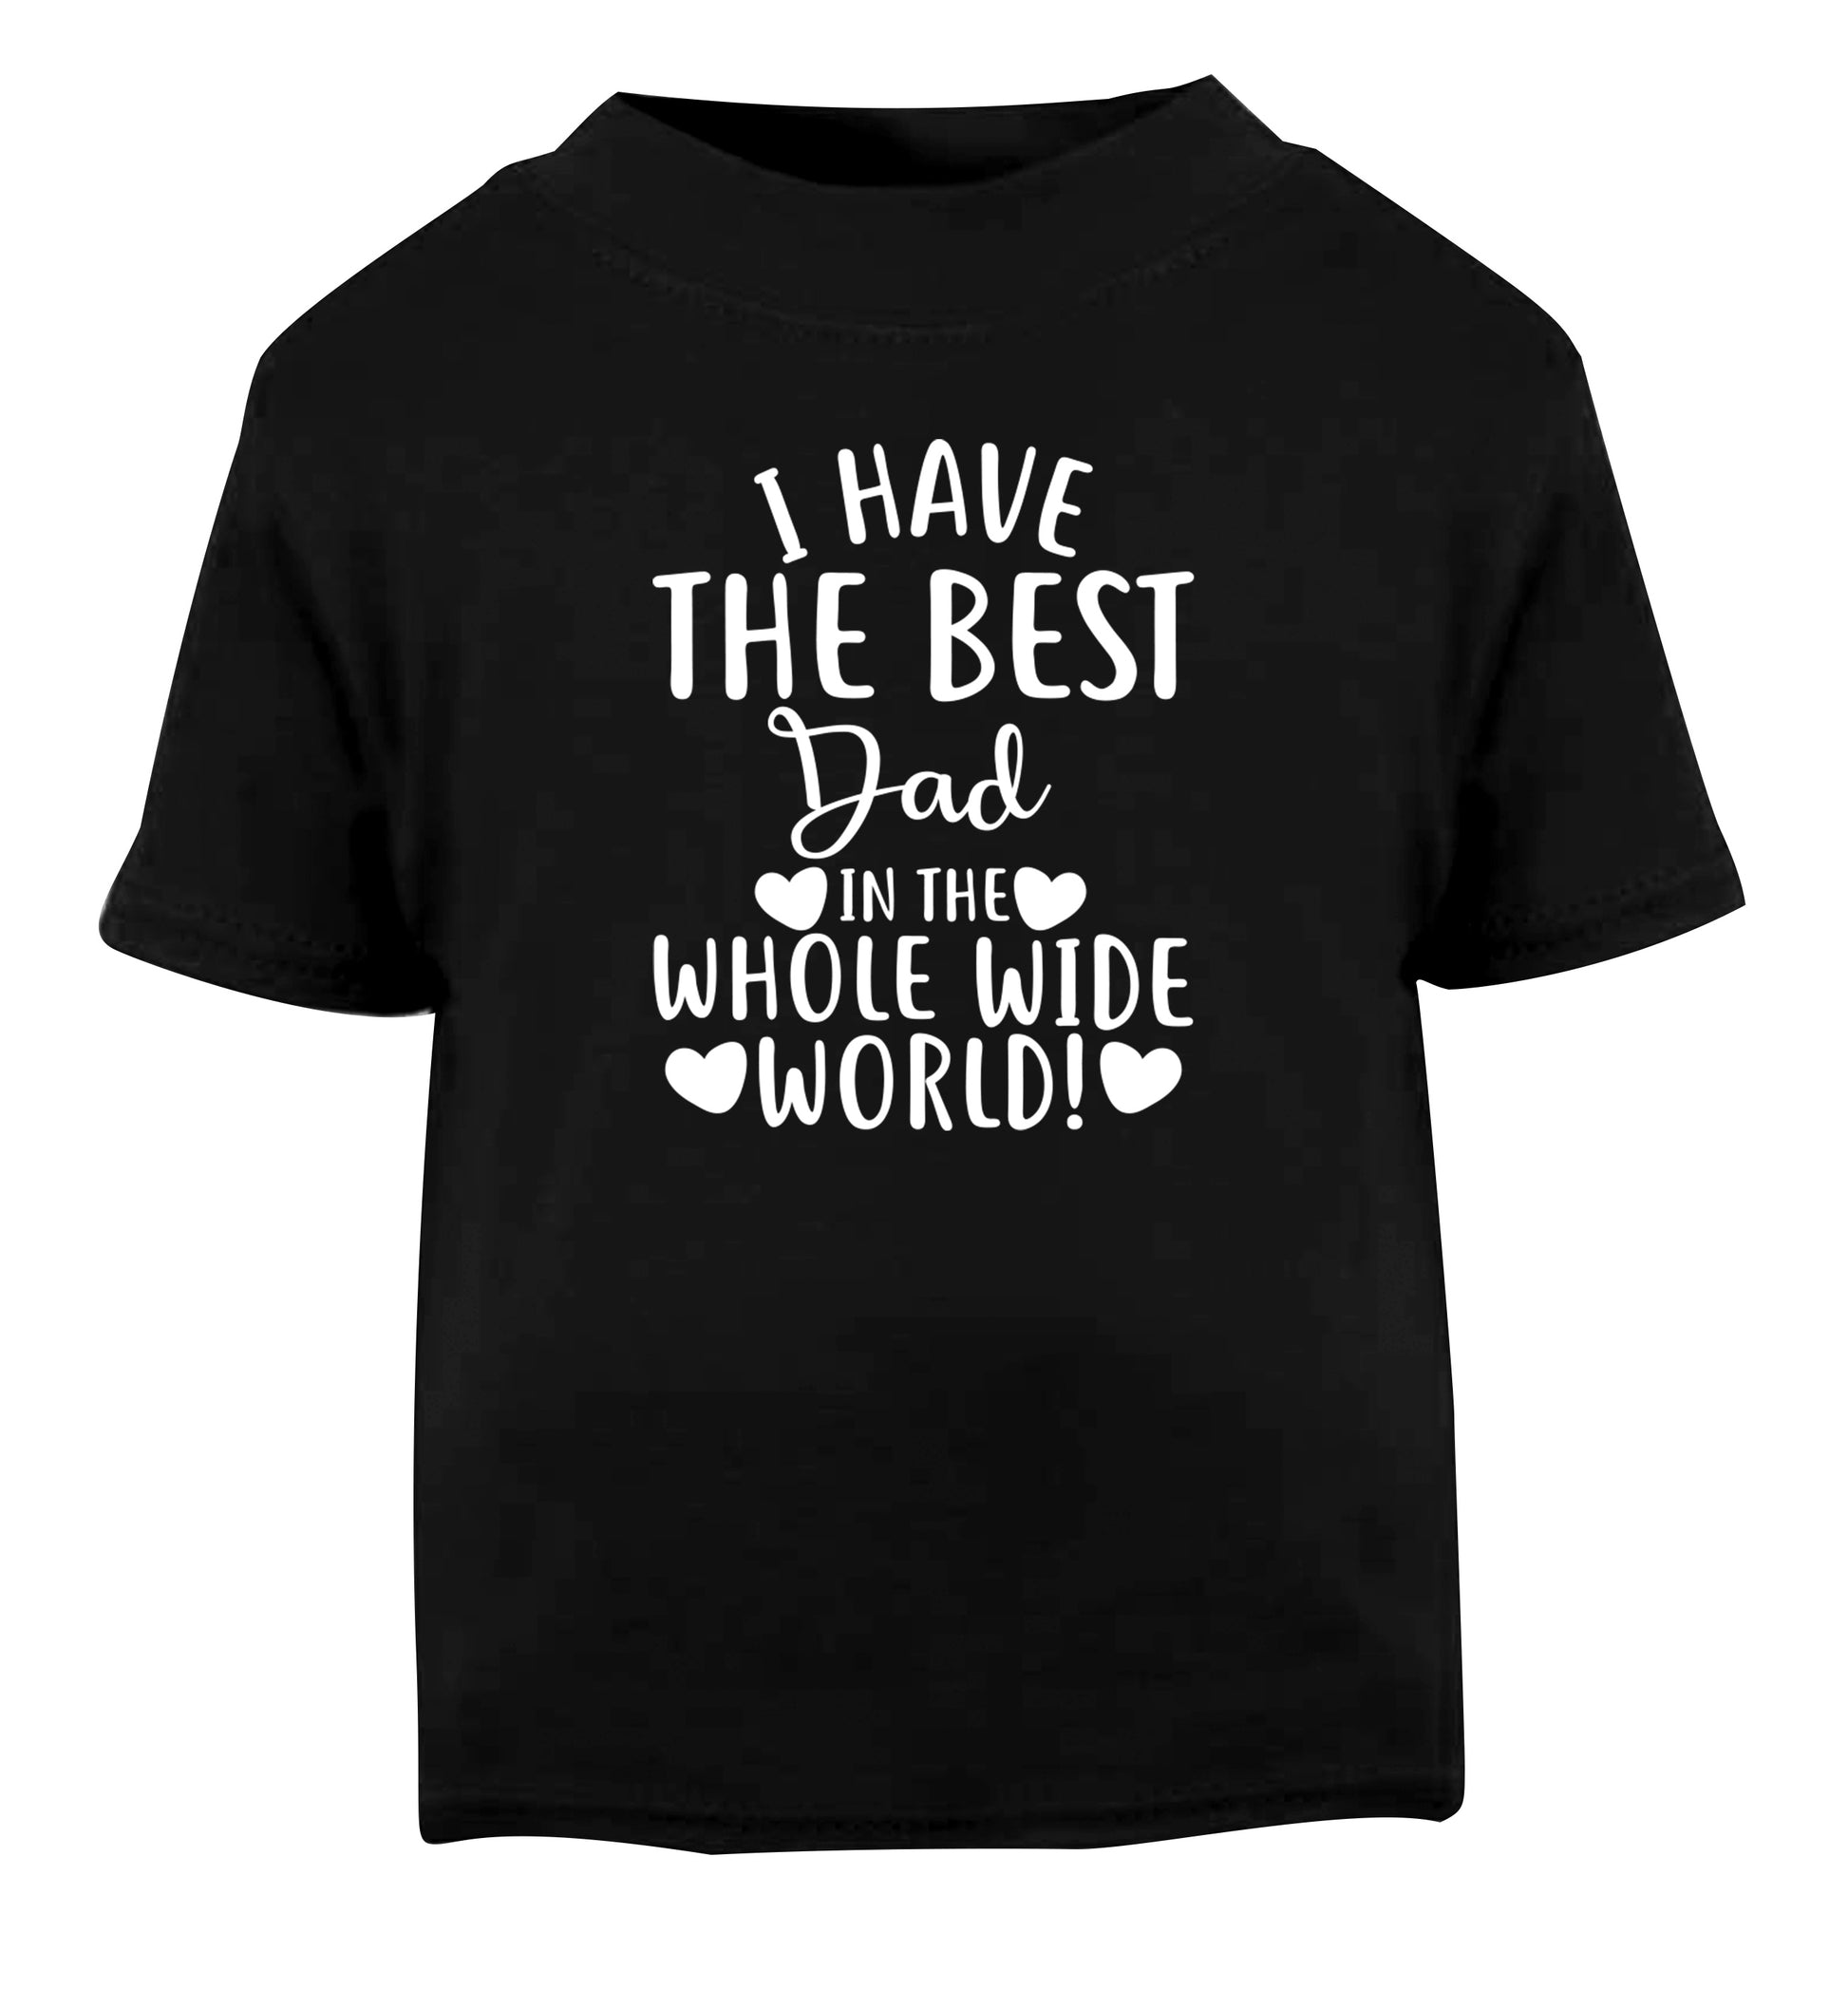 I have the best dad in the whole wide world! Black Baby Toddler Tshirt 2 years